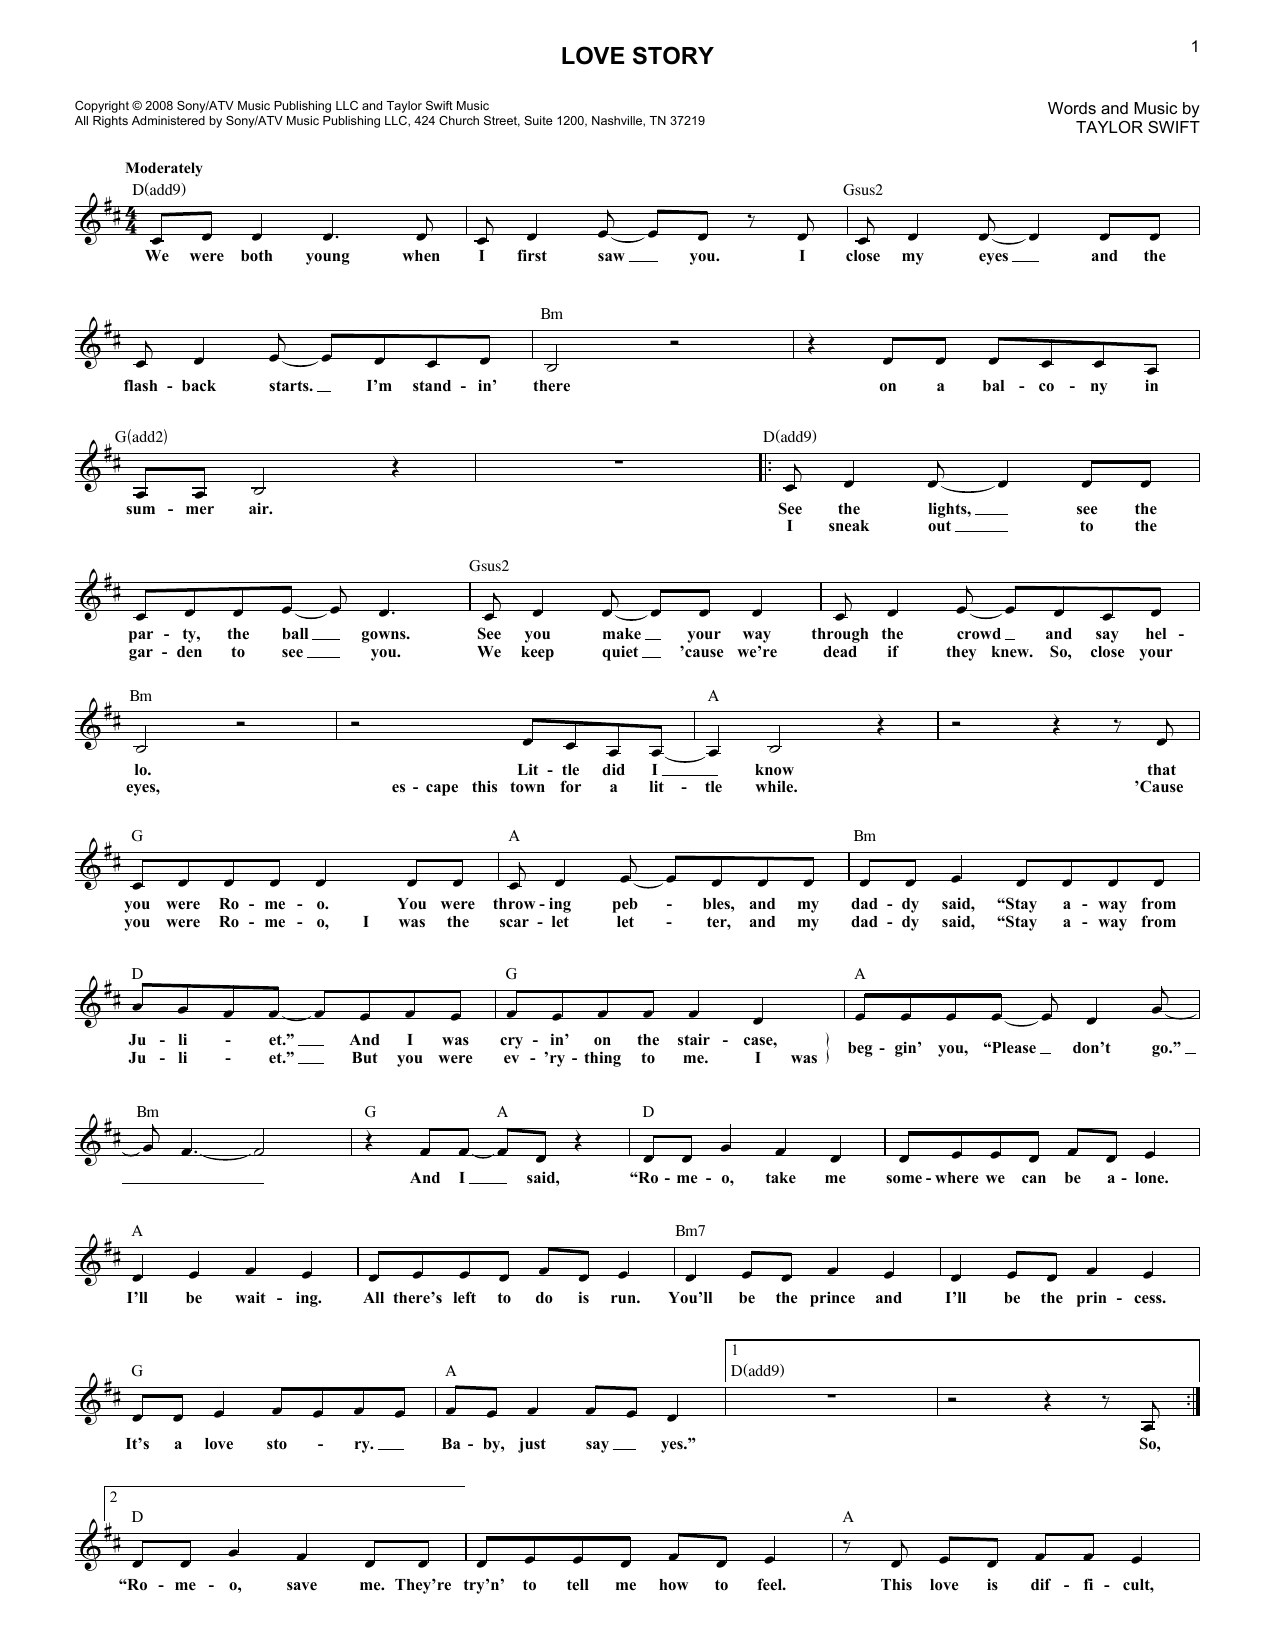 Taylor Swift "Love Story" Sheet Music Notes | Download Printable PDF